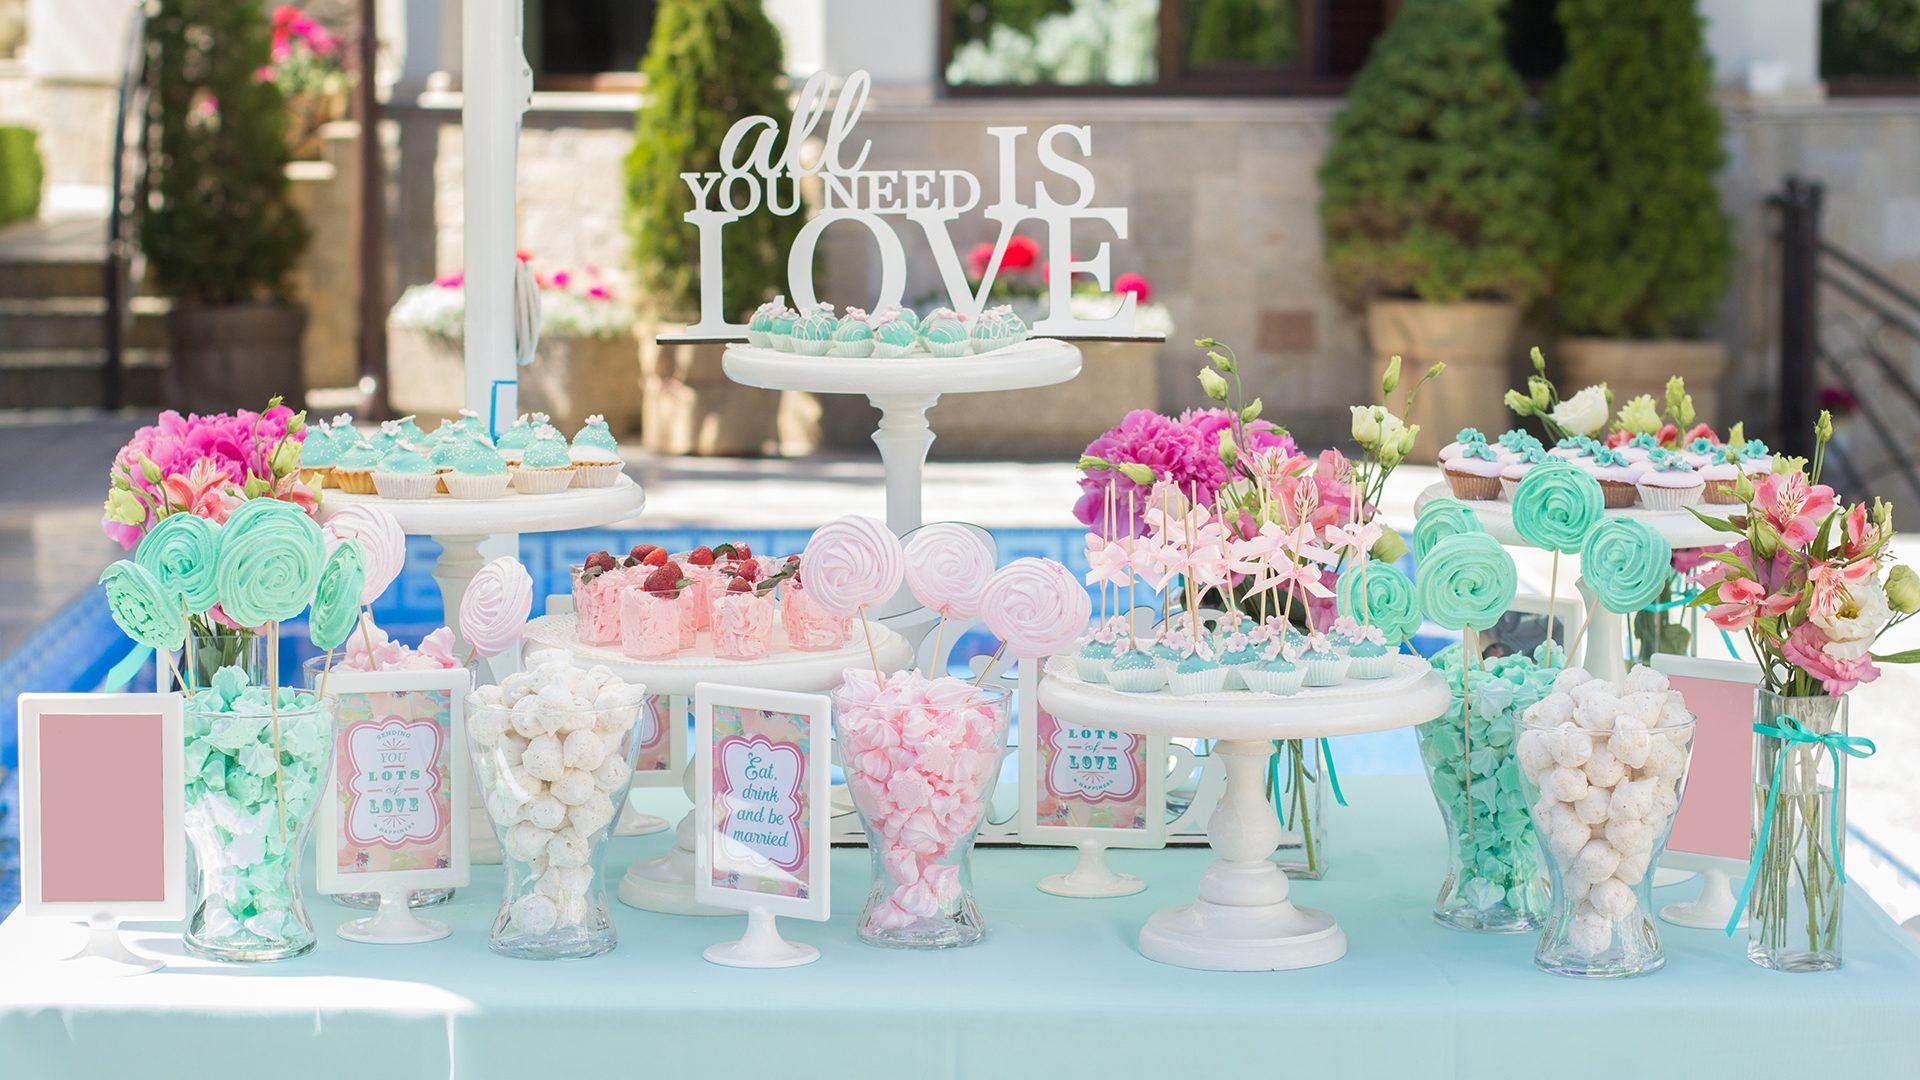 Satisfy Your Sweet Tooth With These New Ways To Serve Candy At Your Wedding